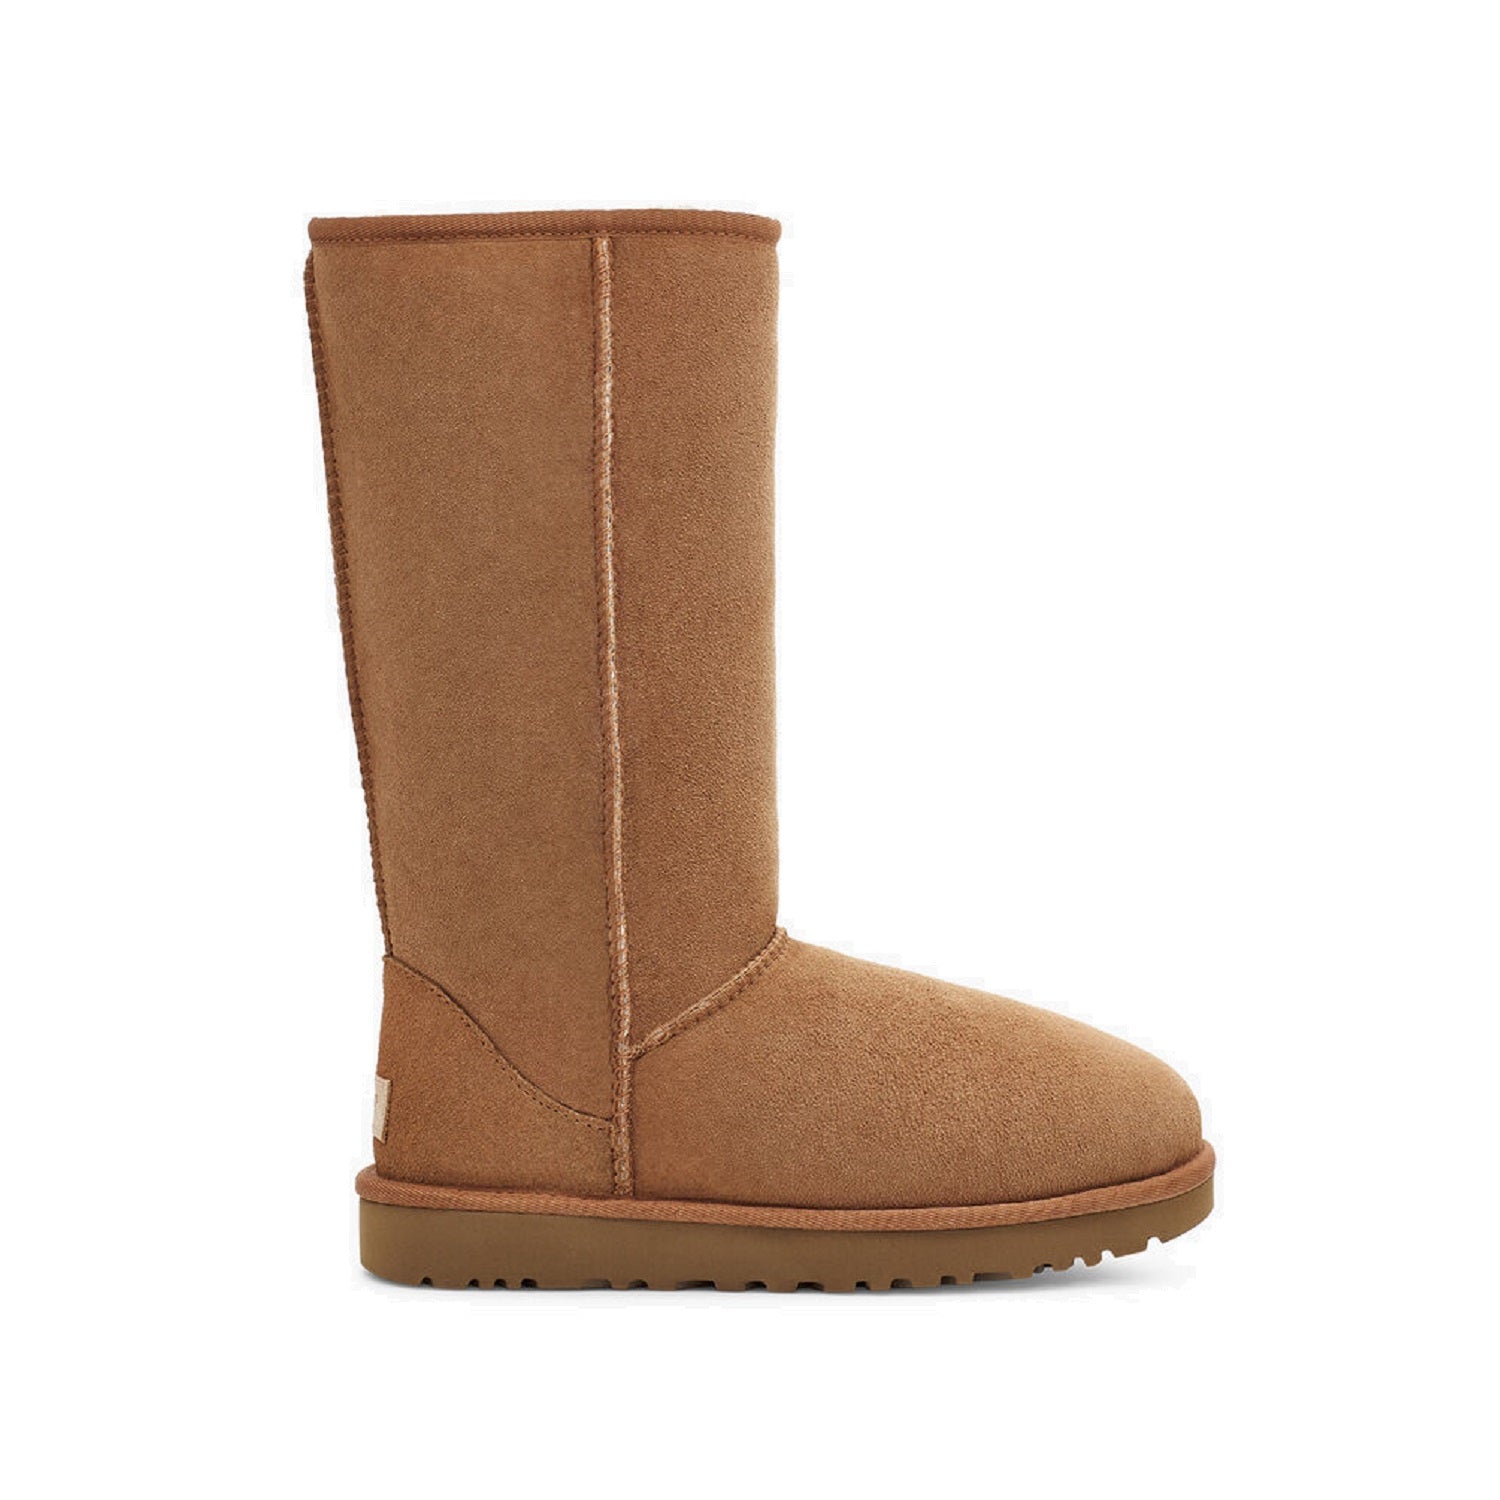 Classic tall Ugg boot in chestnut.